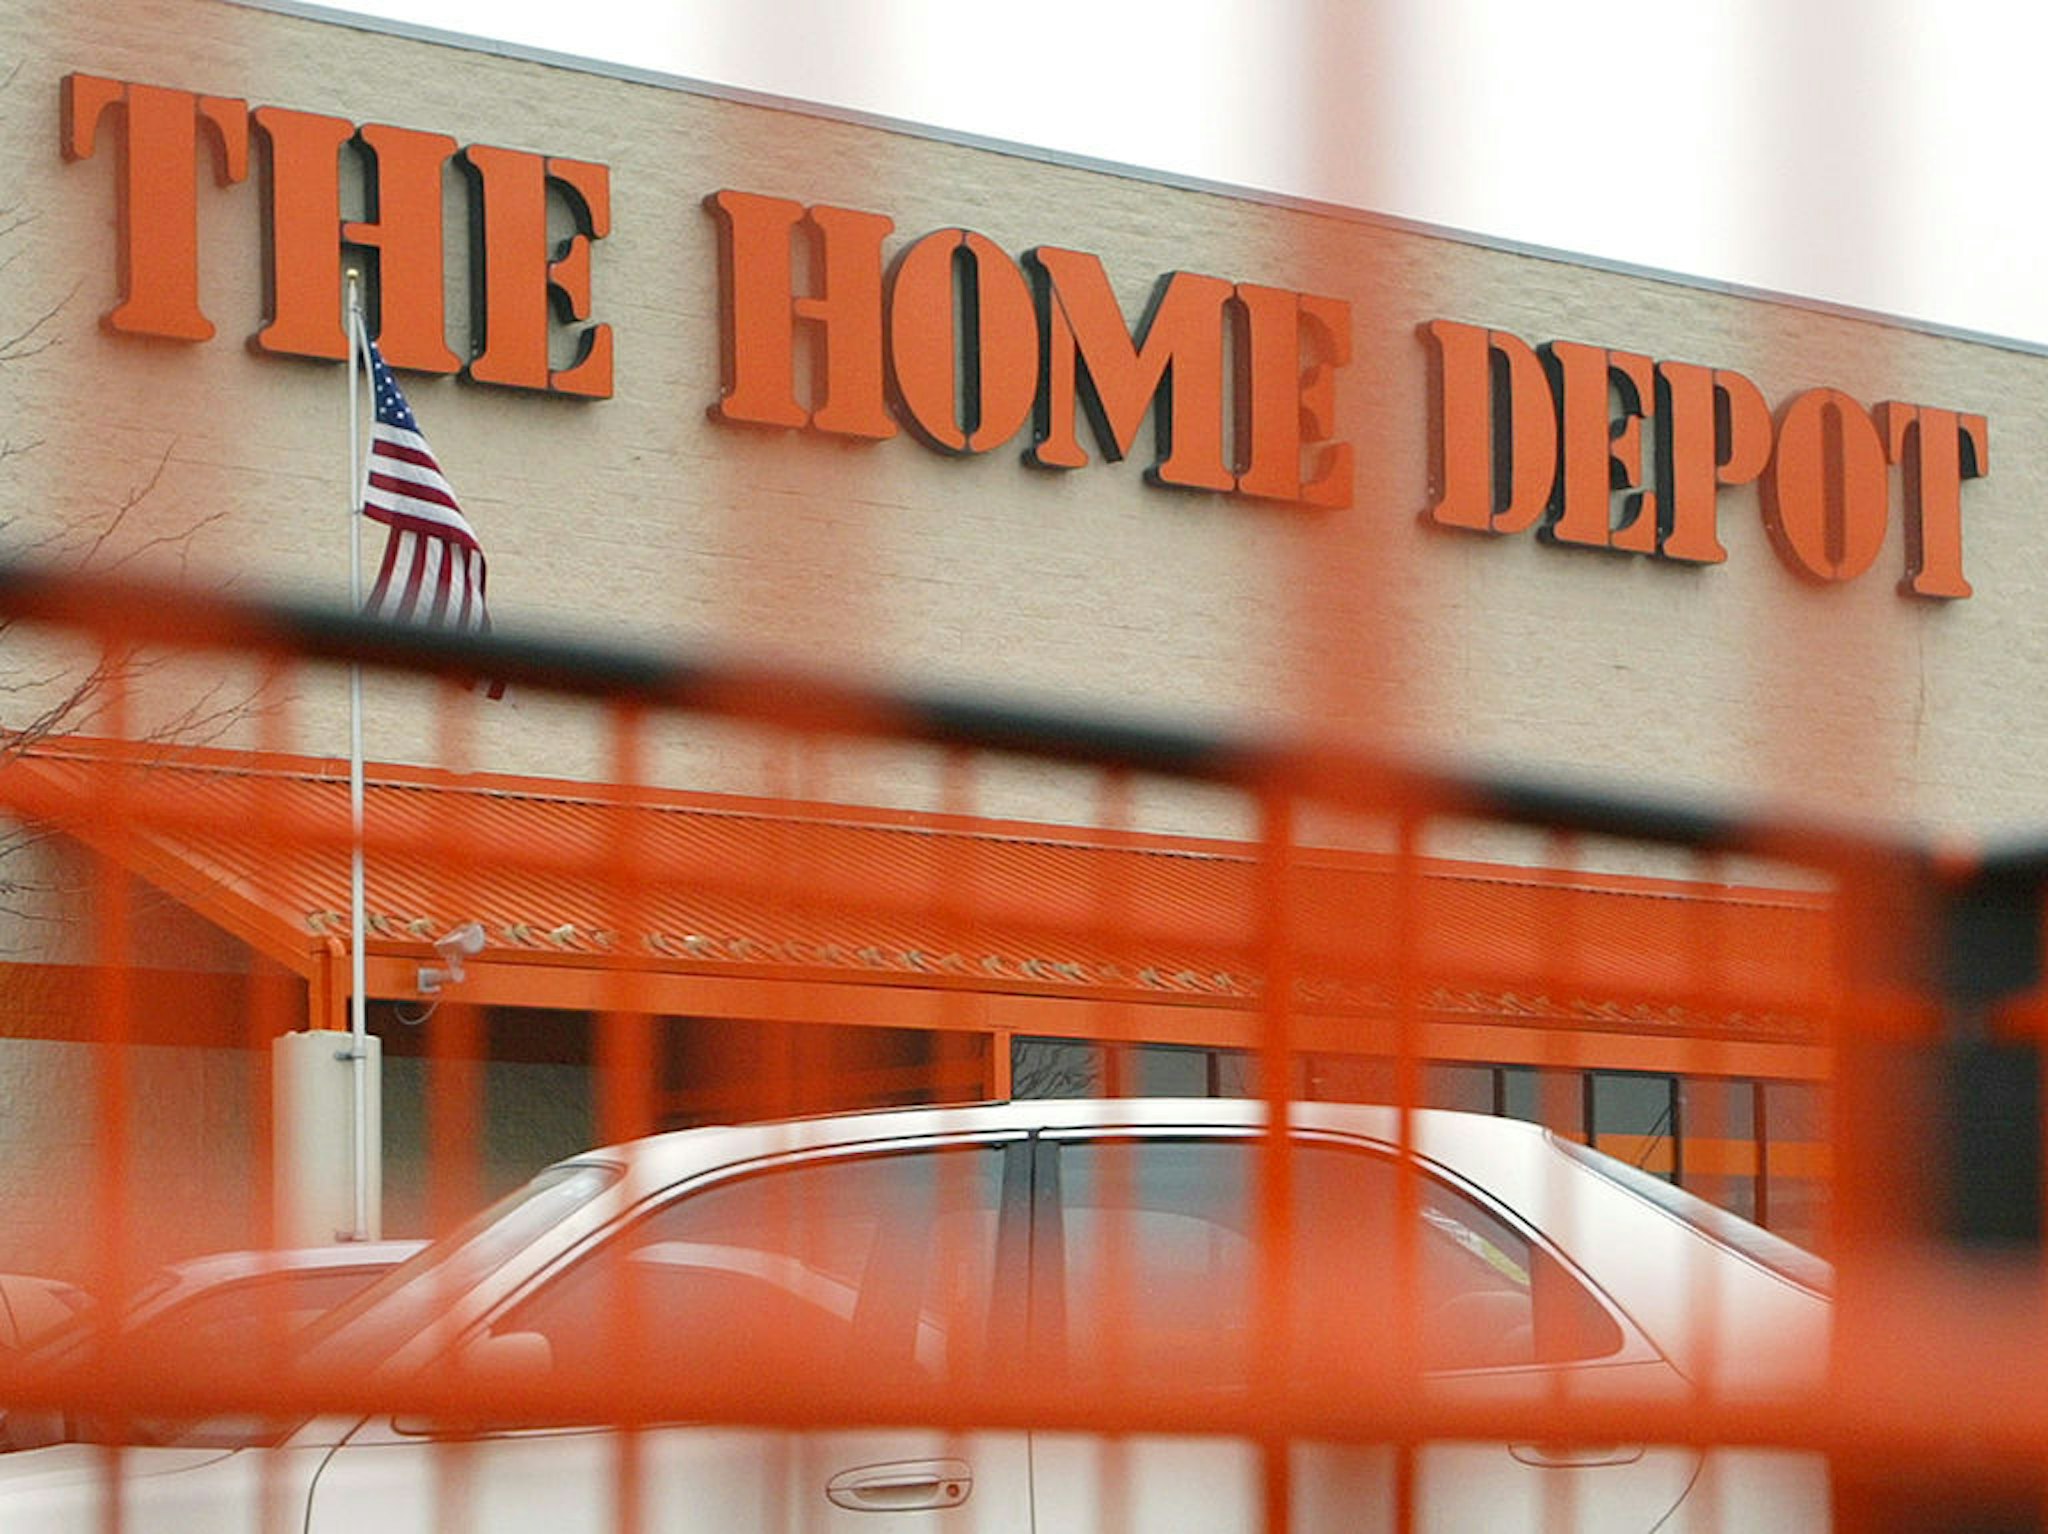 MOUNT PROSPECT, IL - FEBRUARY 19: A Home Depot sign is seen through one of its orange shopping carts February 19, 2004 in Mount Prospect, Illinois. Home Depot, the world's largest home improvement retailer, will announce its 4th Quarter and Fiscal Year 2003 Earnings February 24, 2004. (Photo by Tim Boyle/Getty Images)